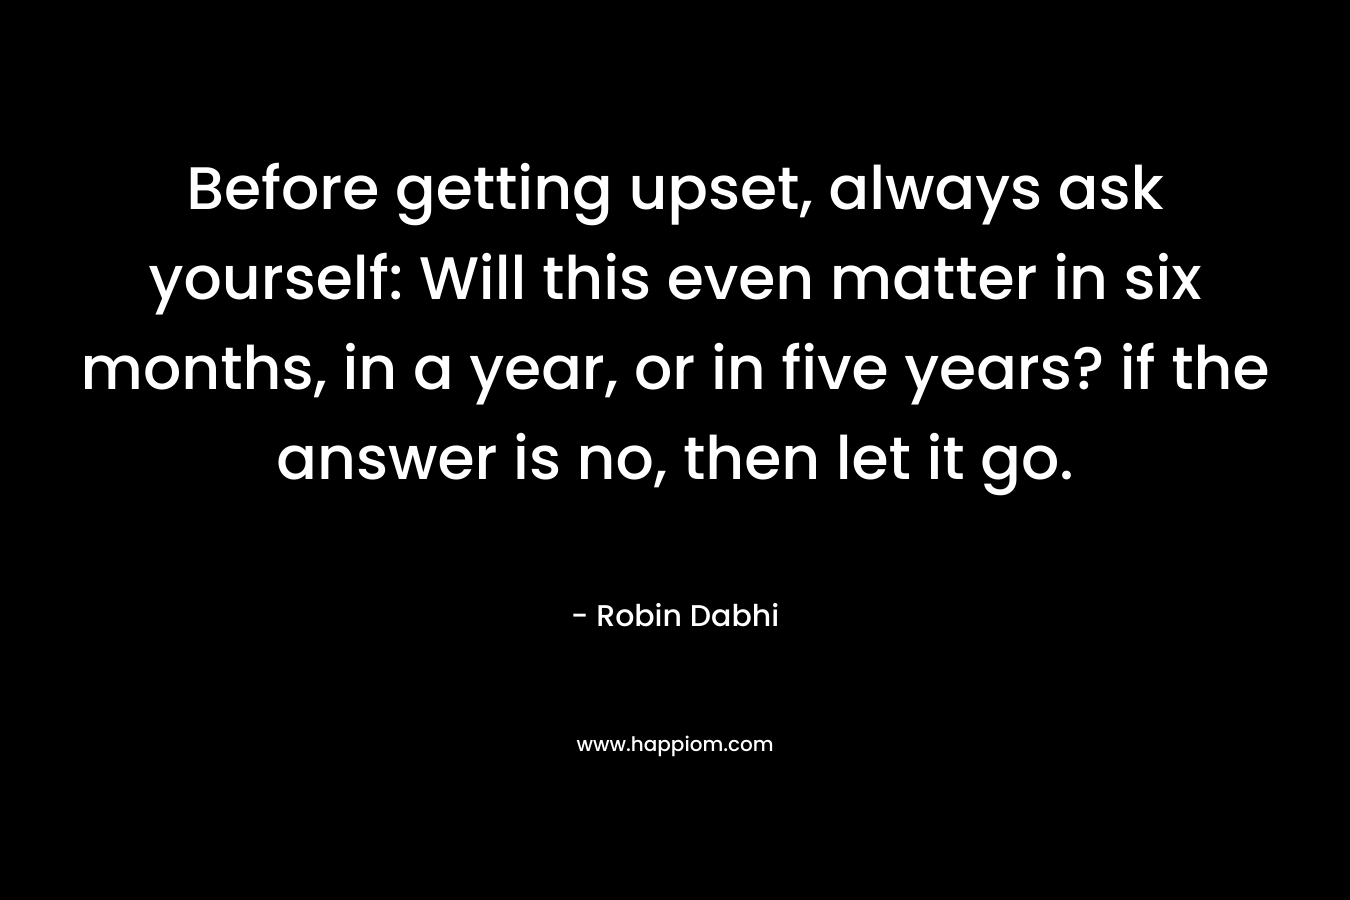 Before getting upset, always ask yourself: Will this even matter in six months, in a year, or in five years? if the answer is no, then let it go. – Robin Dabhi